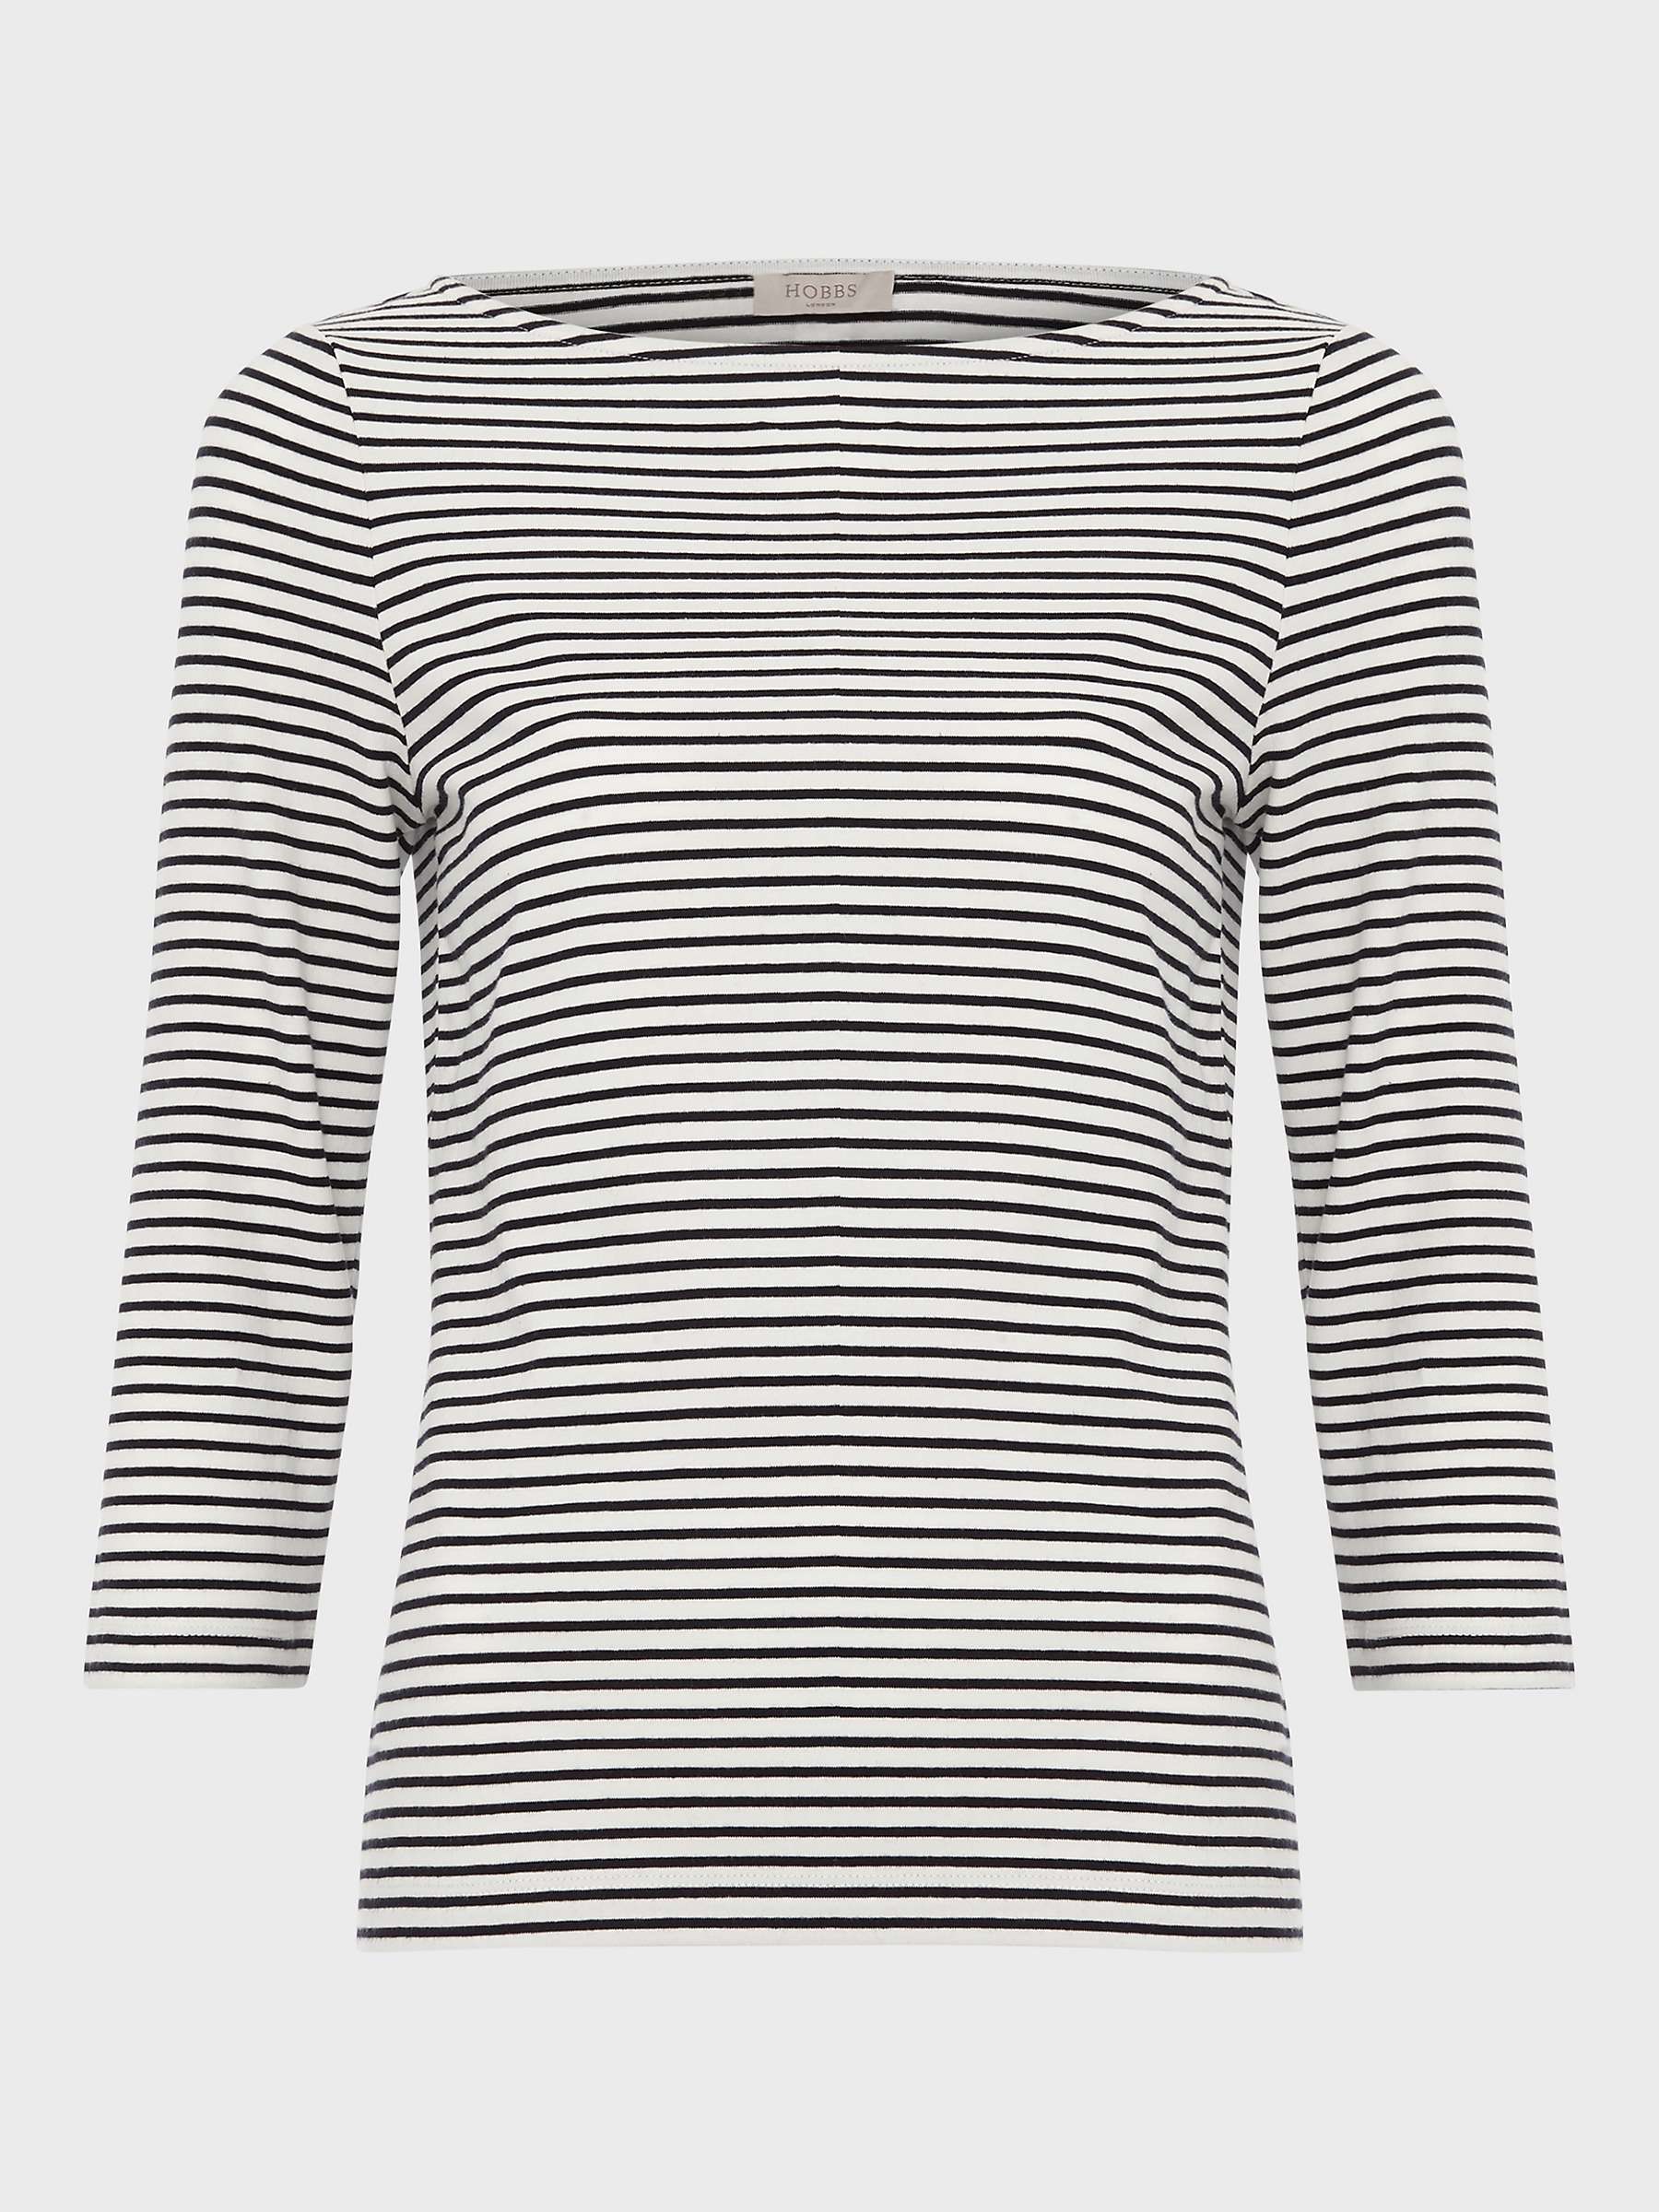 Buy Hobbs Mallory Striped Top, Ivory/Navy Online at johnlewis.com